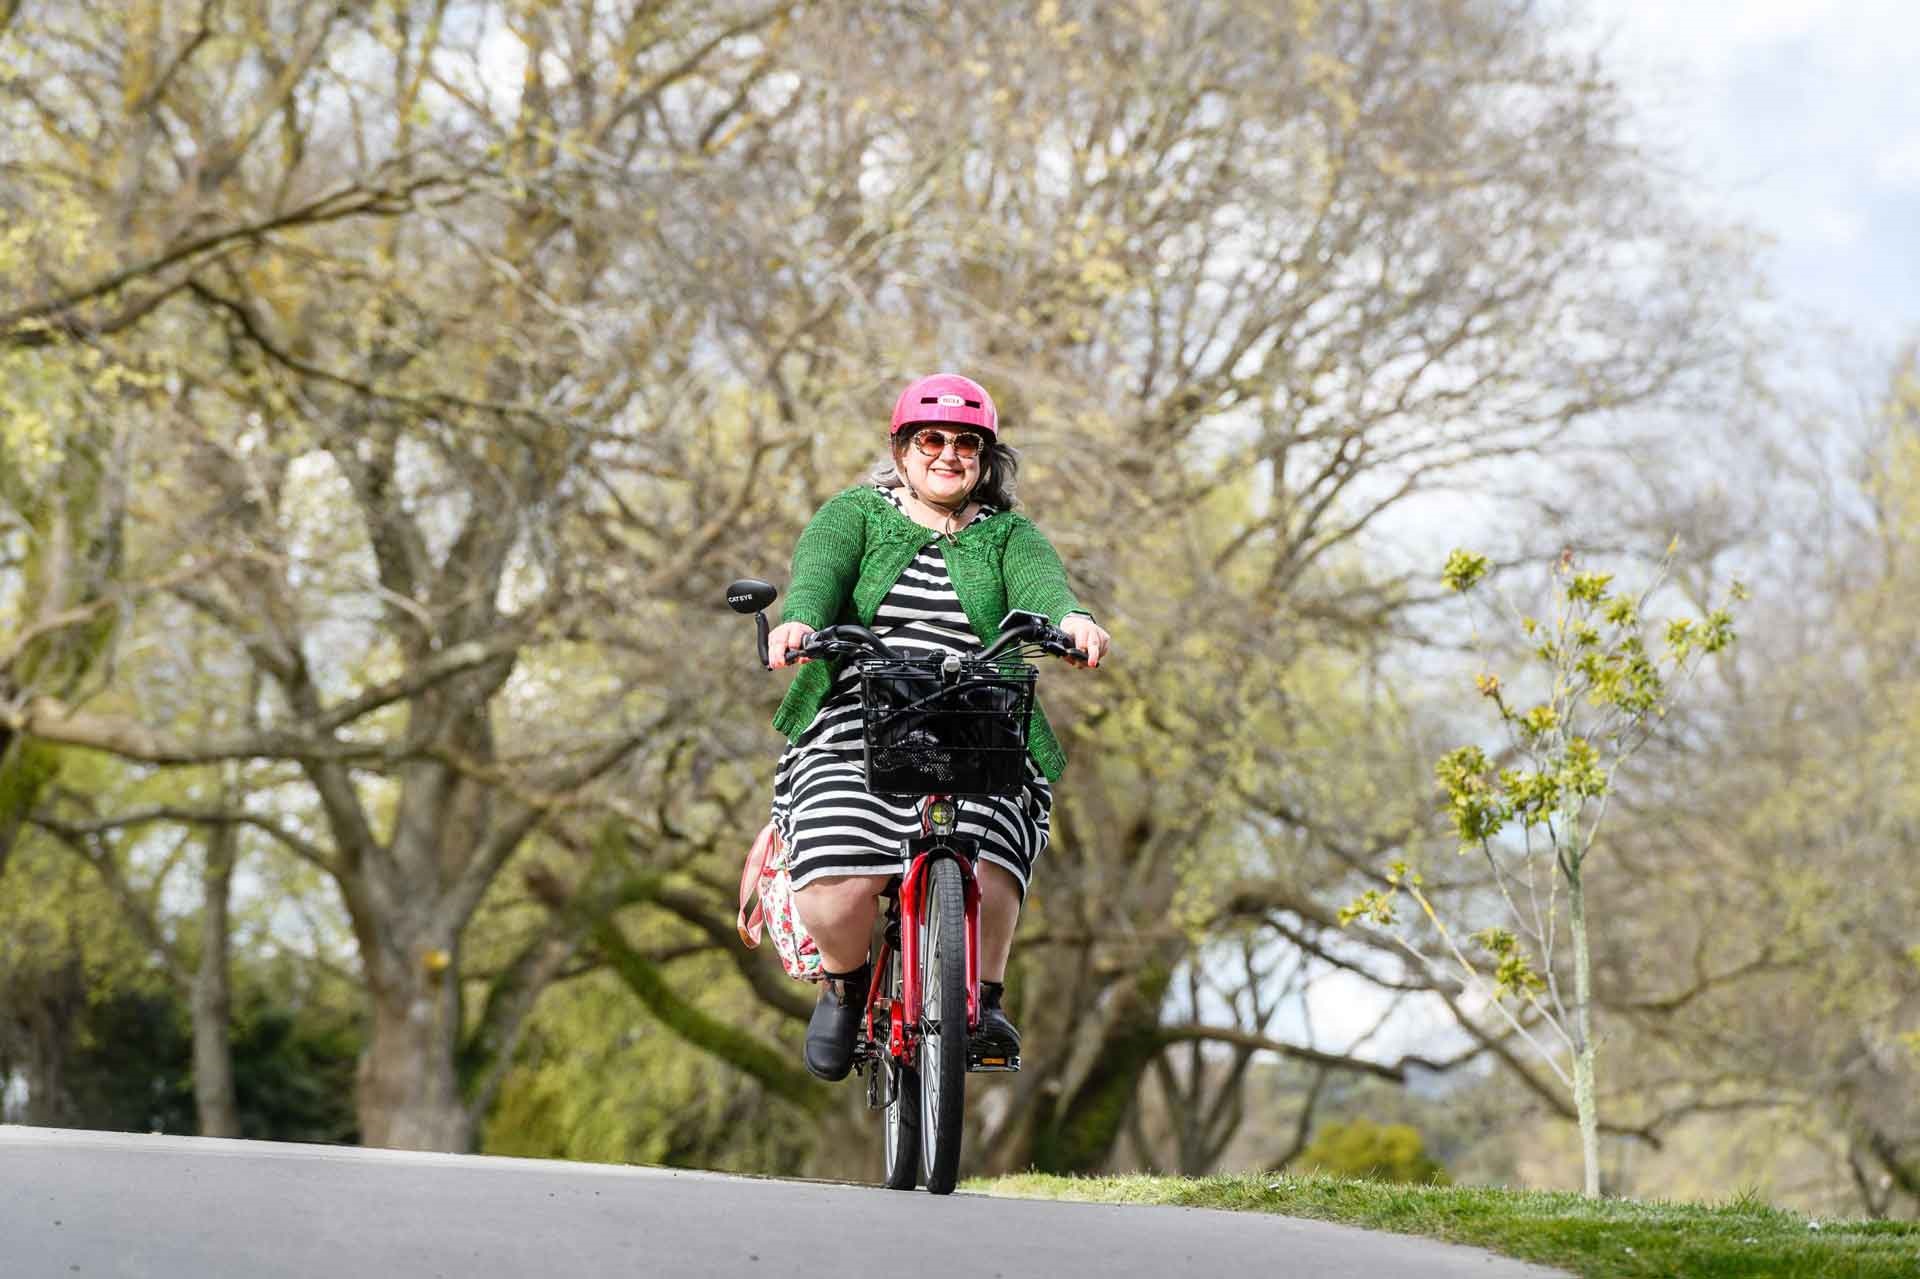 Photo shows smiling woman in a frock riding a utility bike with a flowery pannier and front basket along a tree-lined route.